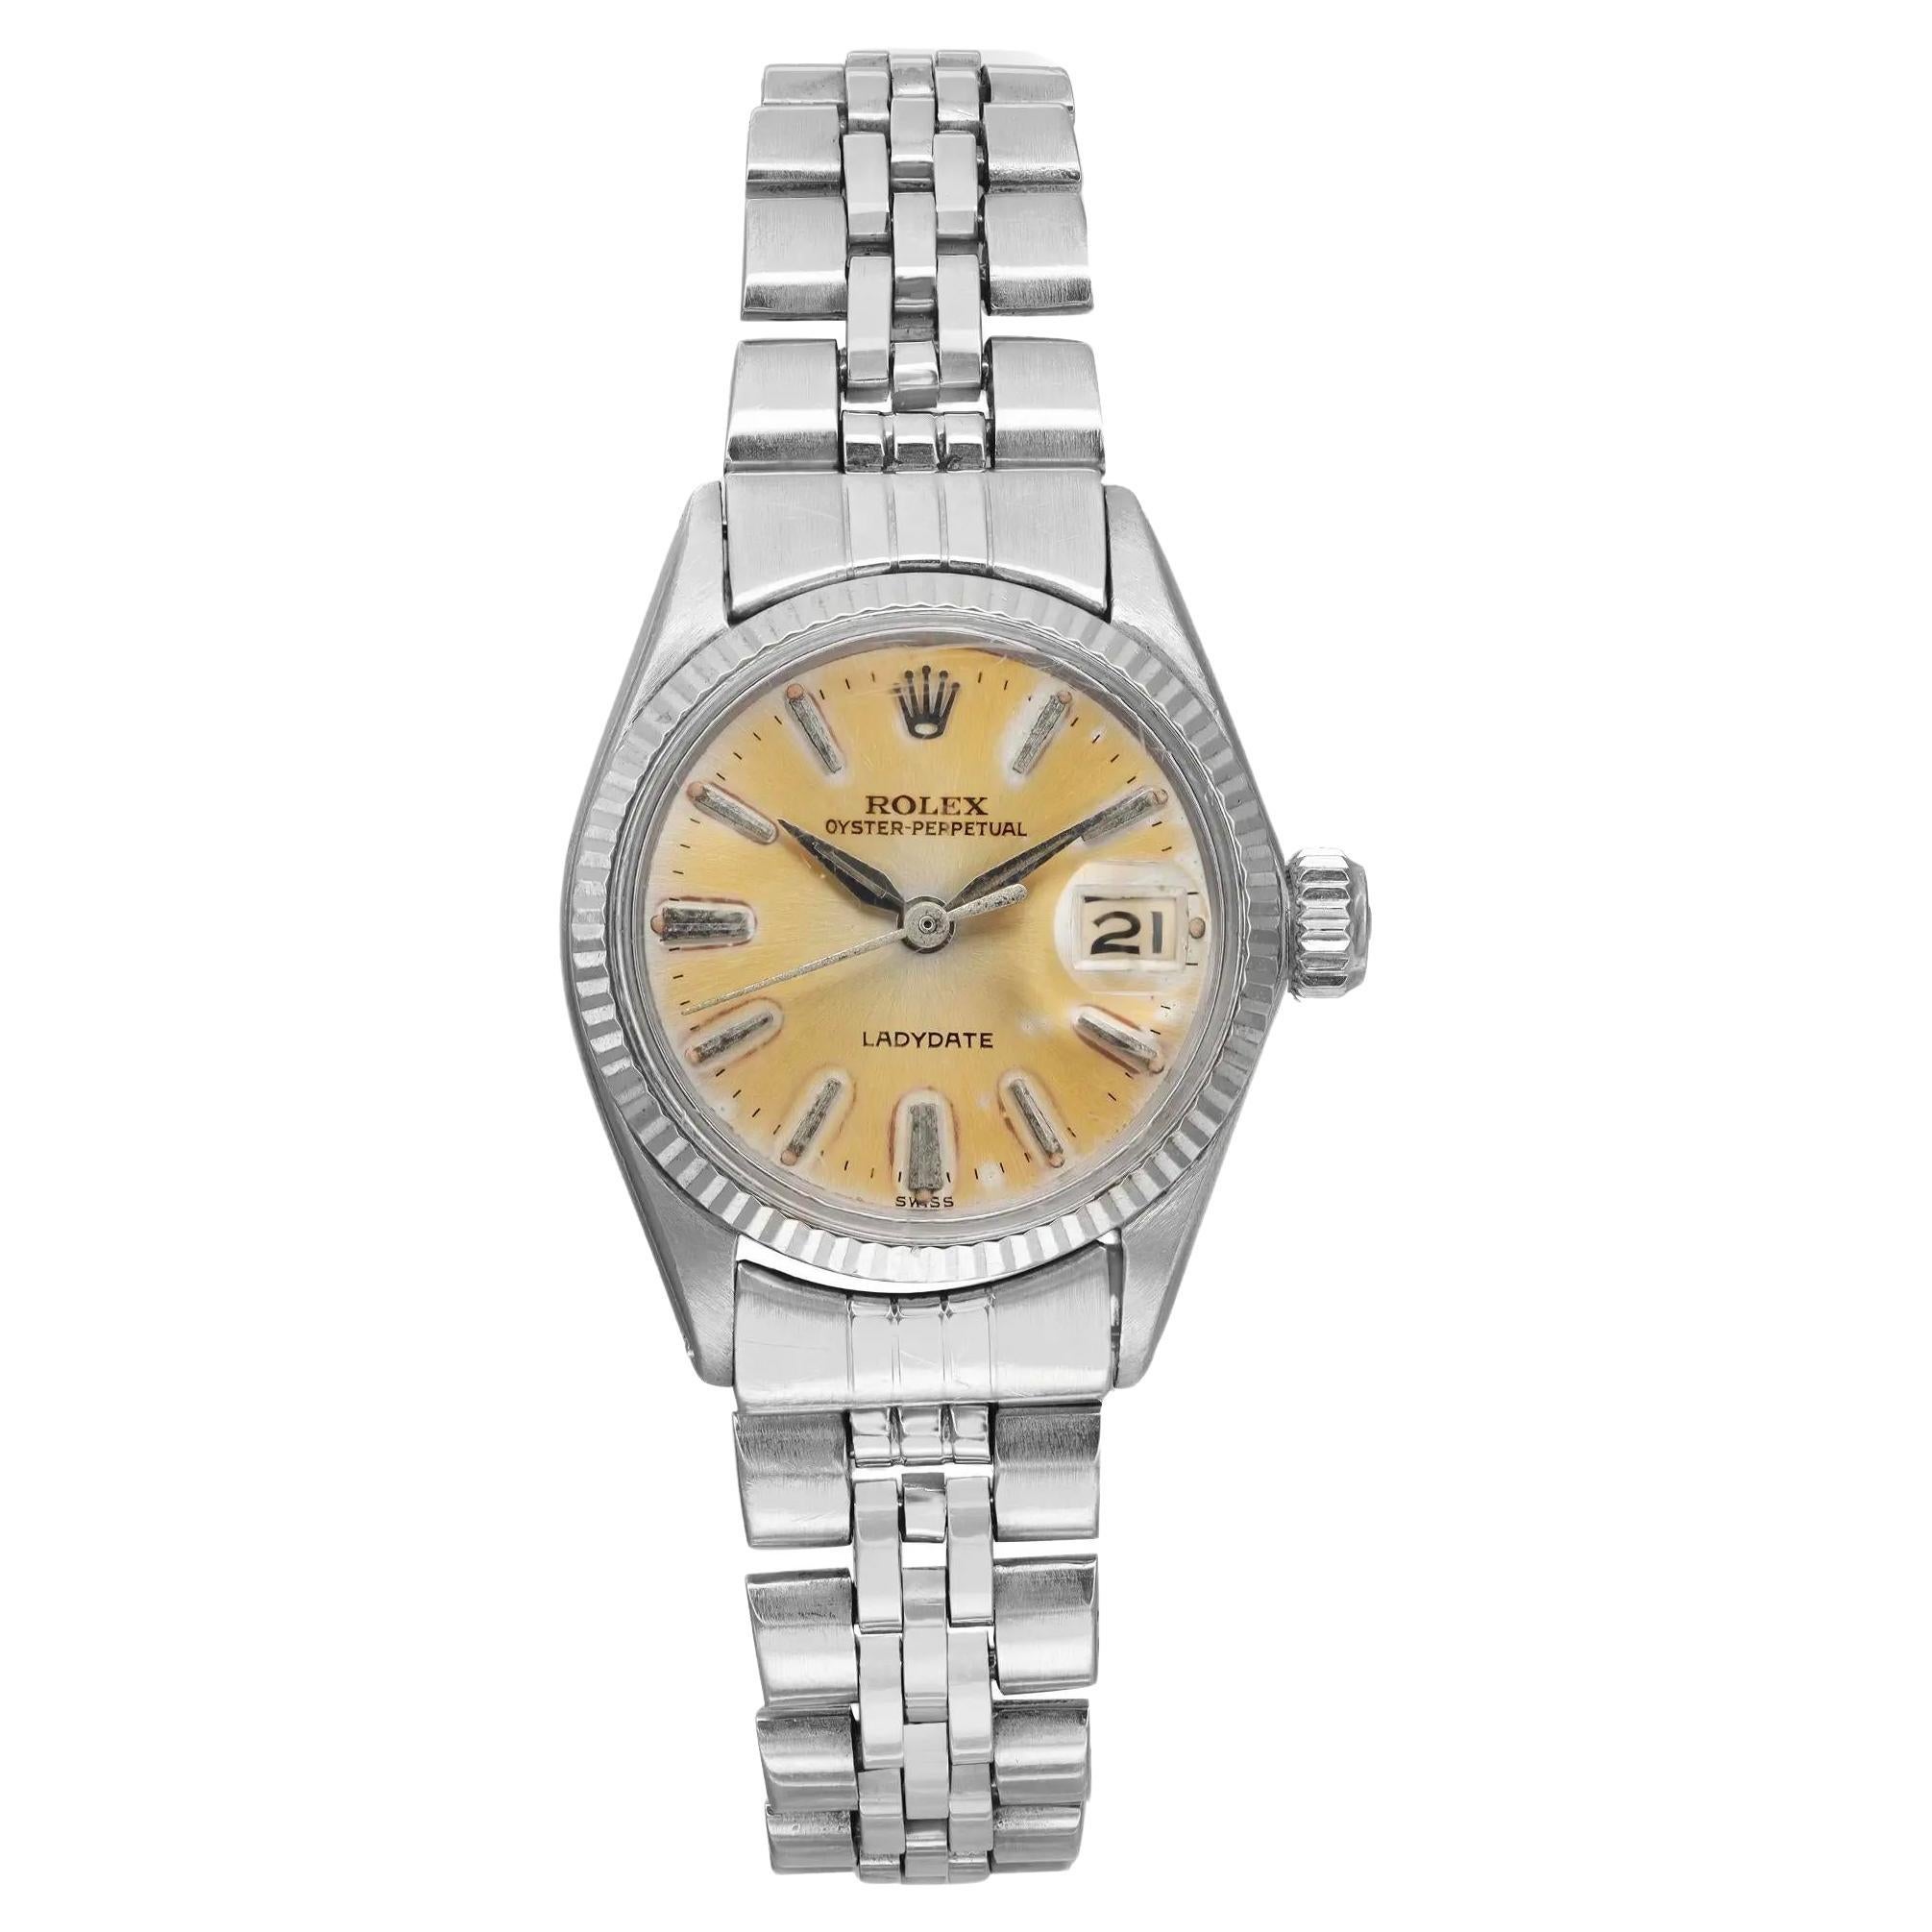 Rolex Oyster Perpetual LadyDate Steel Silver Dial Automatic Vintage Watch 6517